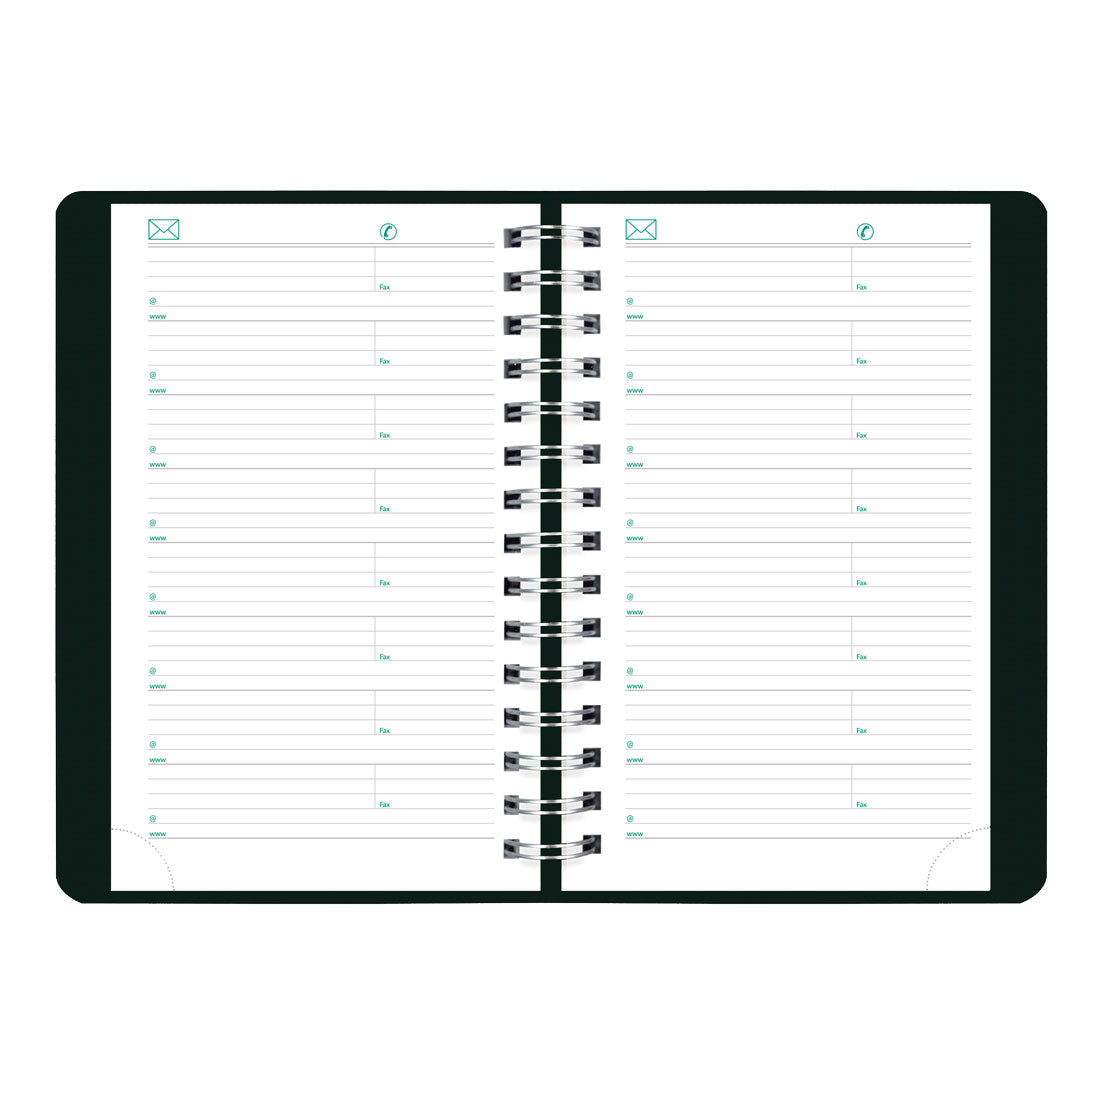 EcoLogix Daily Planner 2025, Black, CB410W.BLK